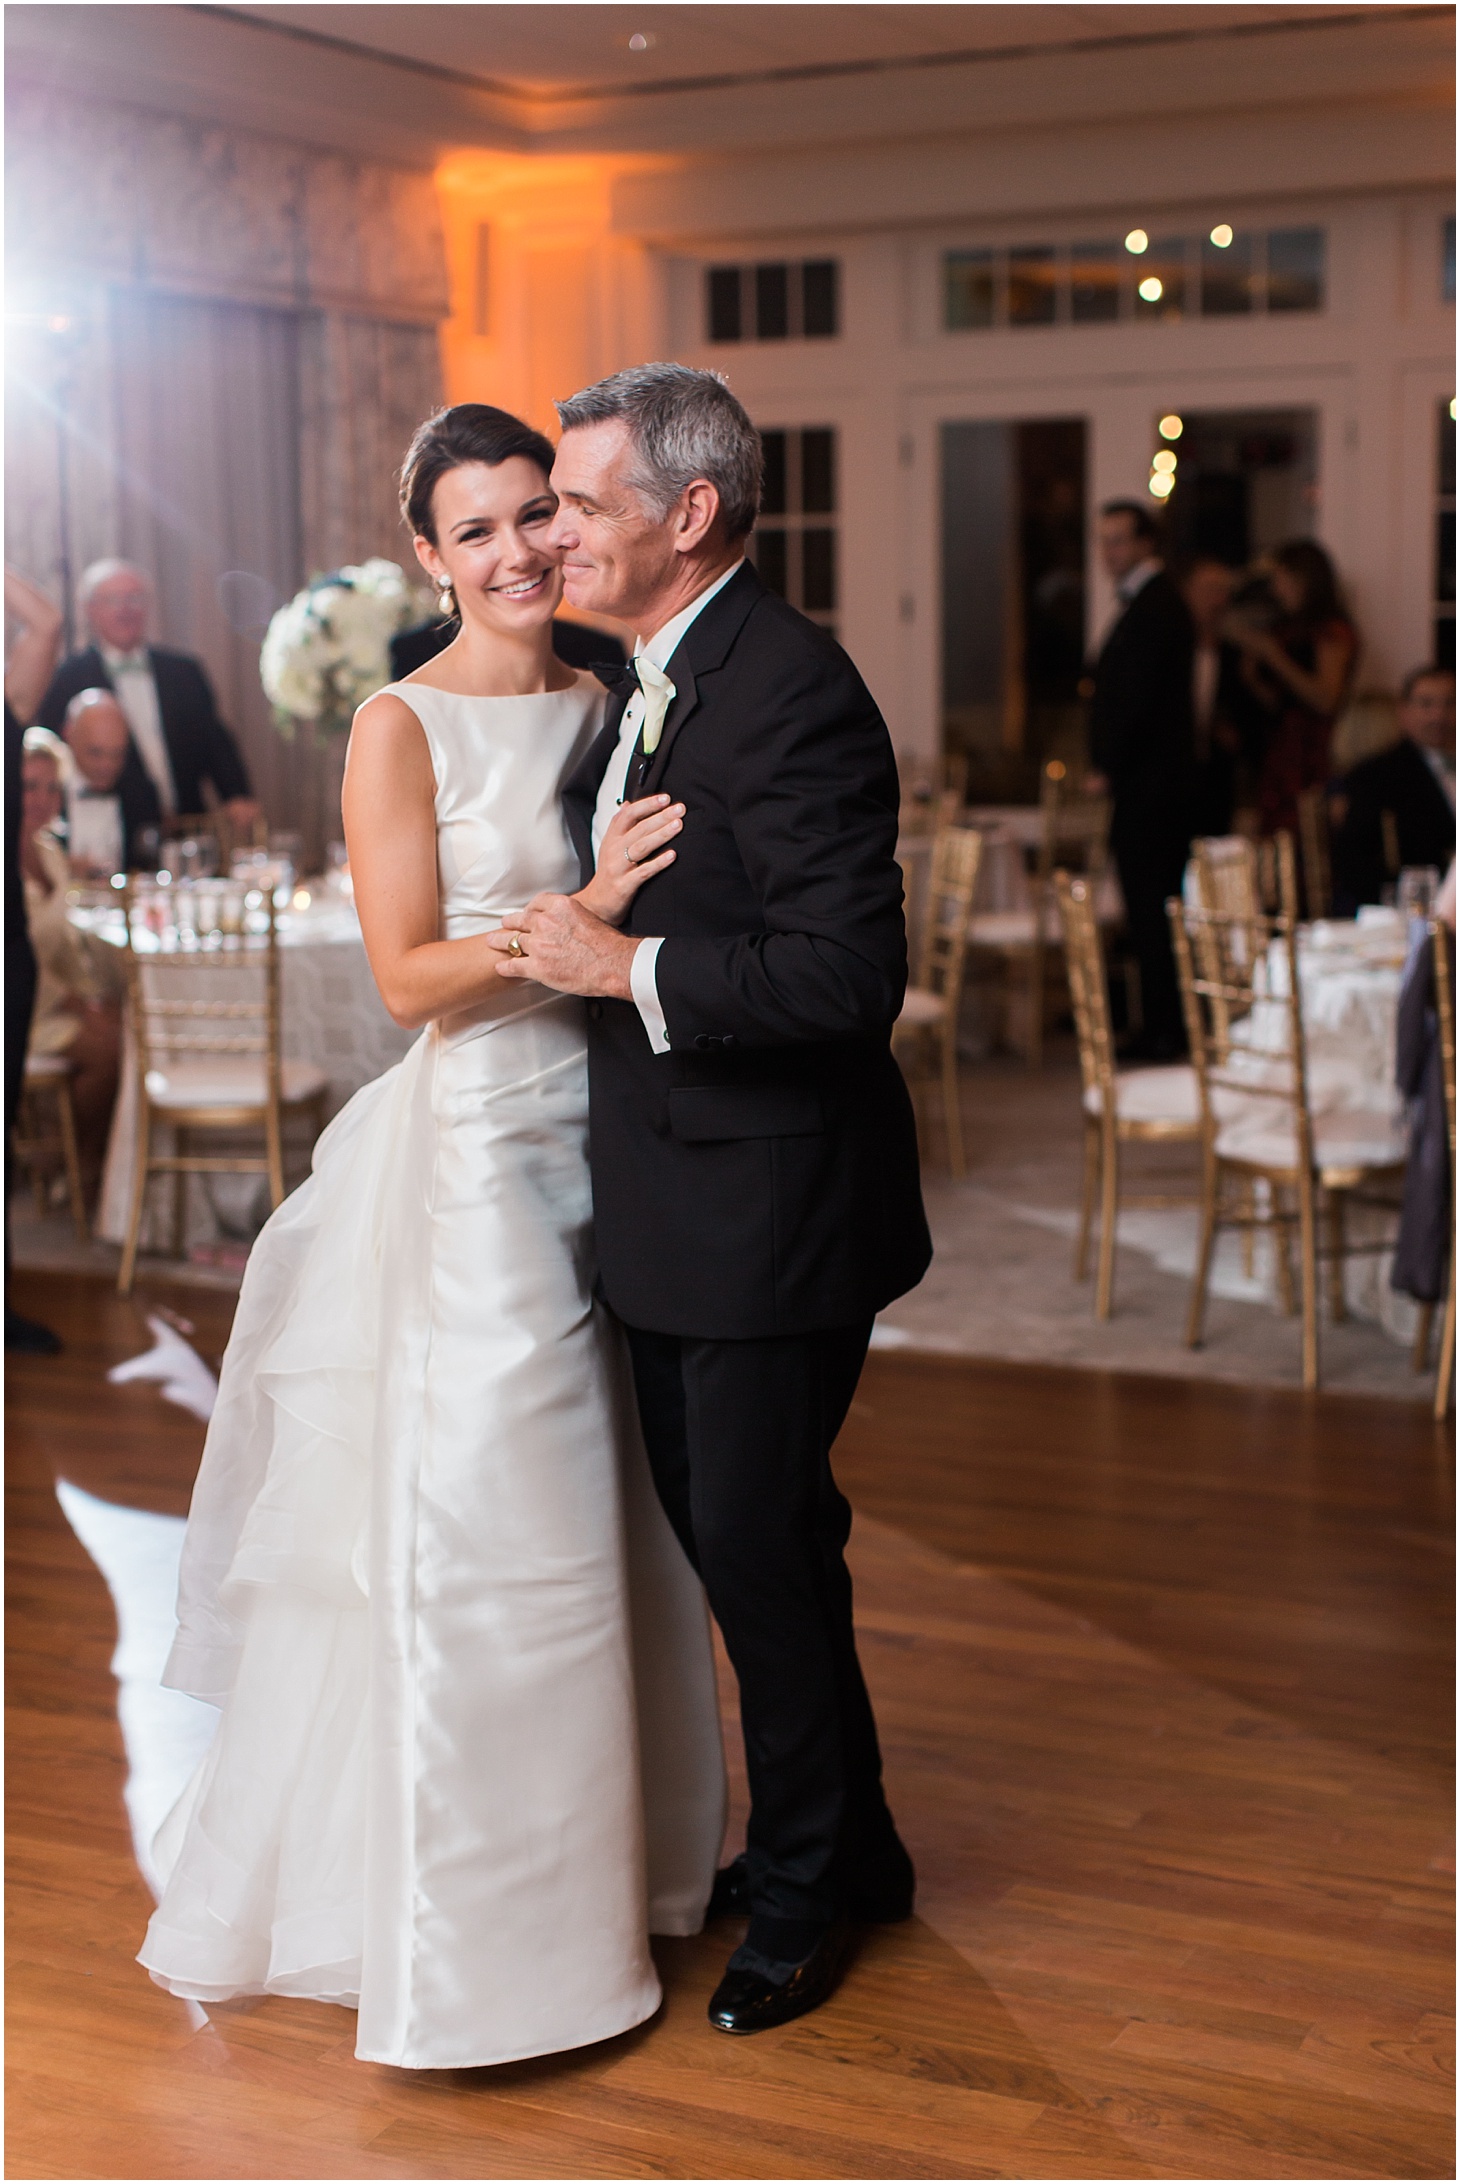 Father-Daughter Dance at Wedding Reception at Columbia Country Club | Wedding Ceremony at Cathedral of St. Matthew the Apostle | Classy October Wedding in Washington, D.C. | Sarah Bradshaw Photography